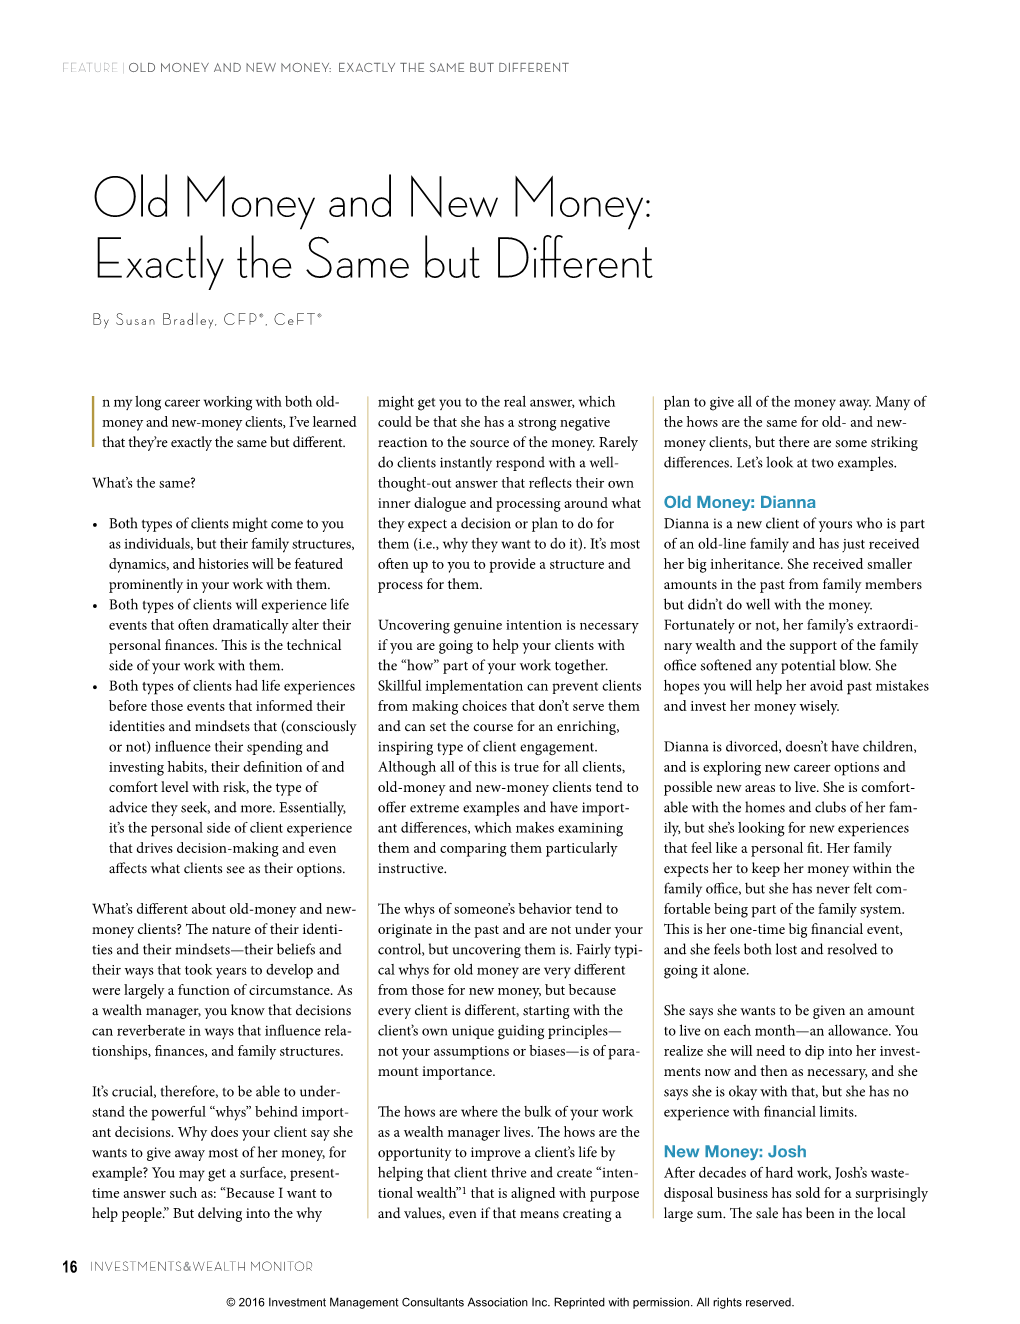 Old Money and New Money: Exactly the Same but Different